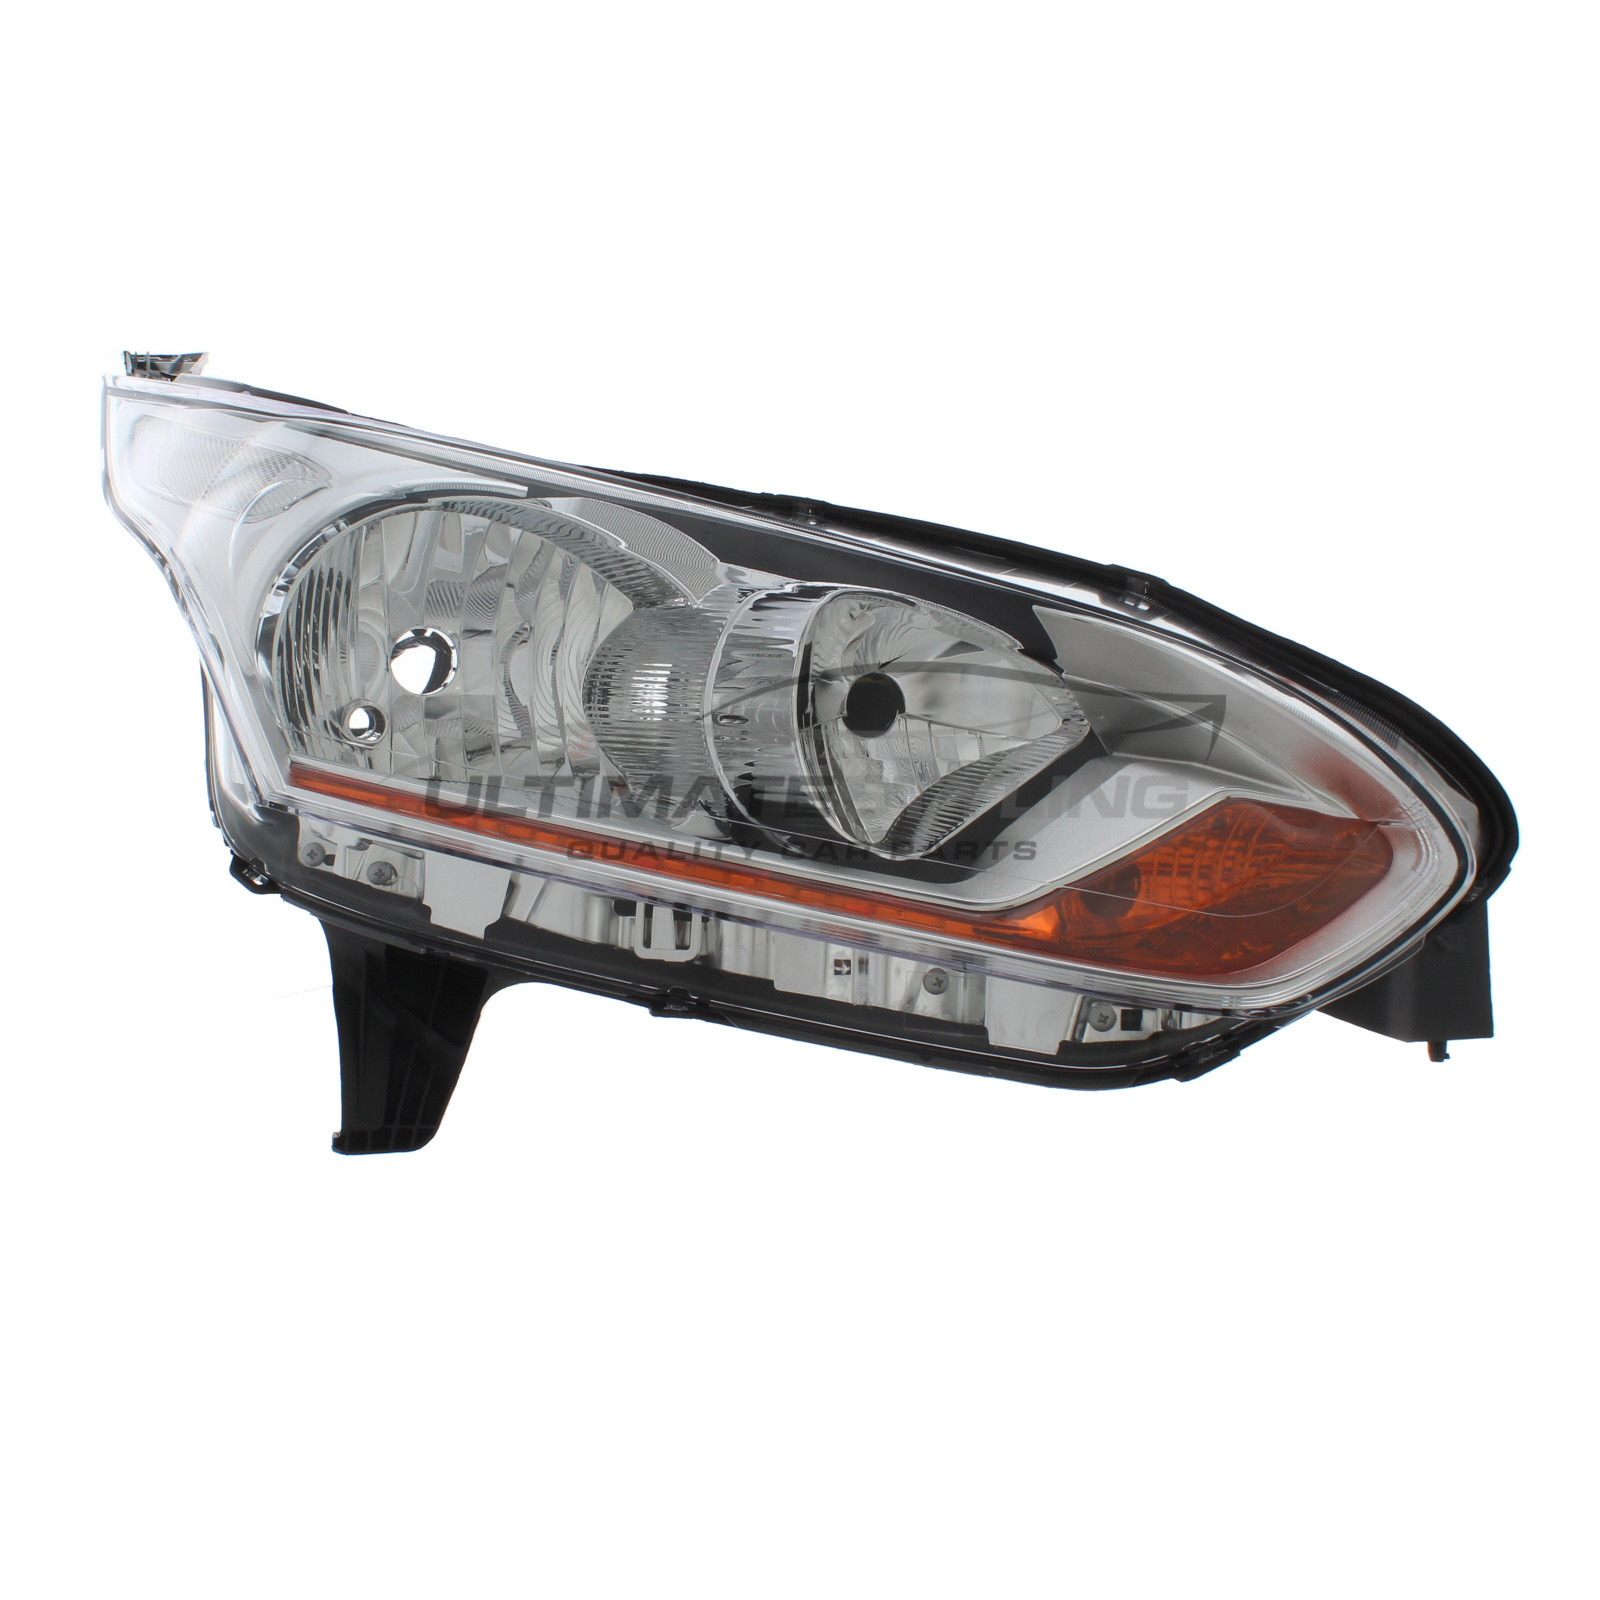 Headlight / Headlamp for Ford Transit Connect